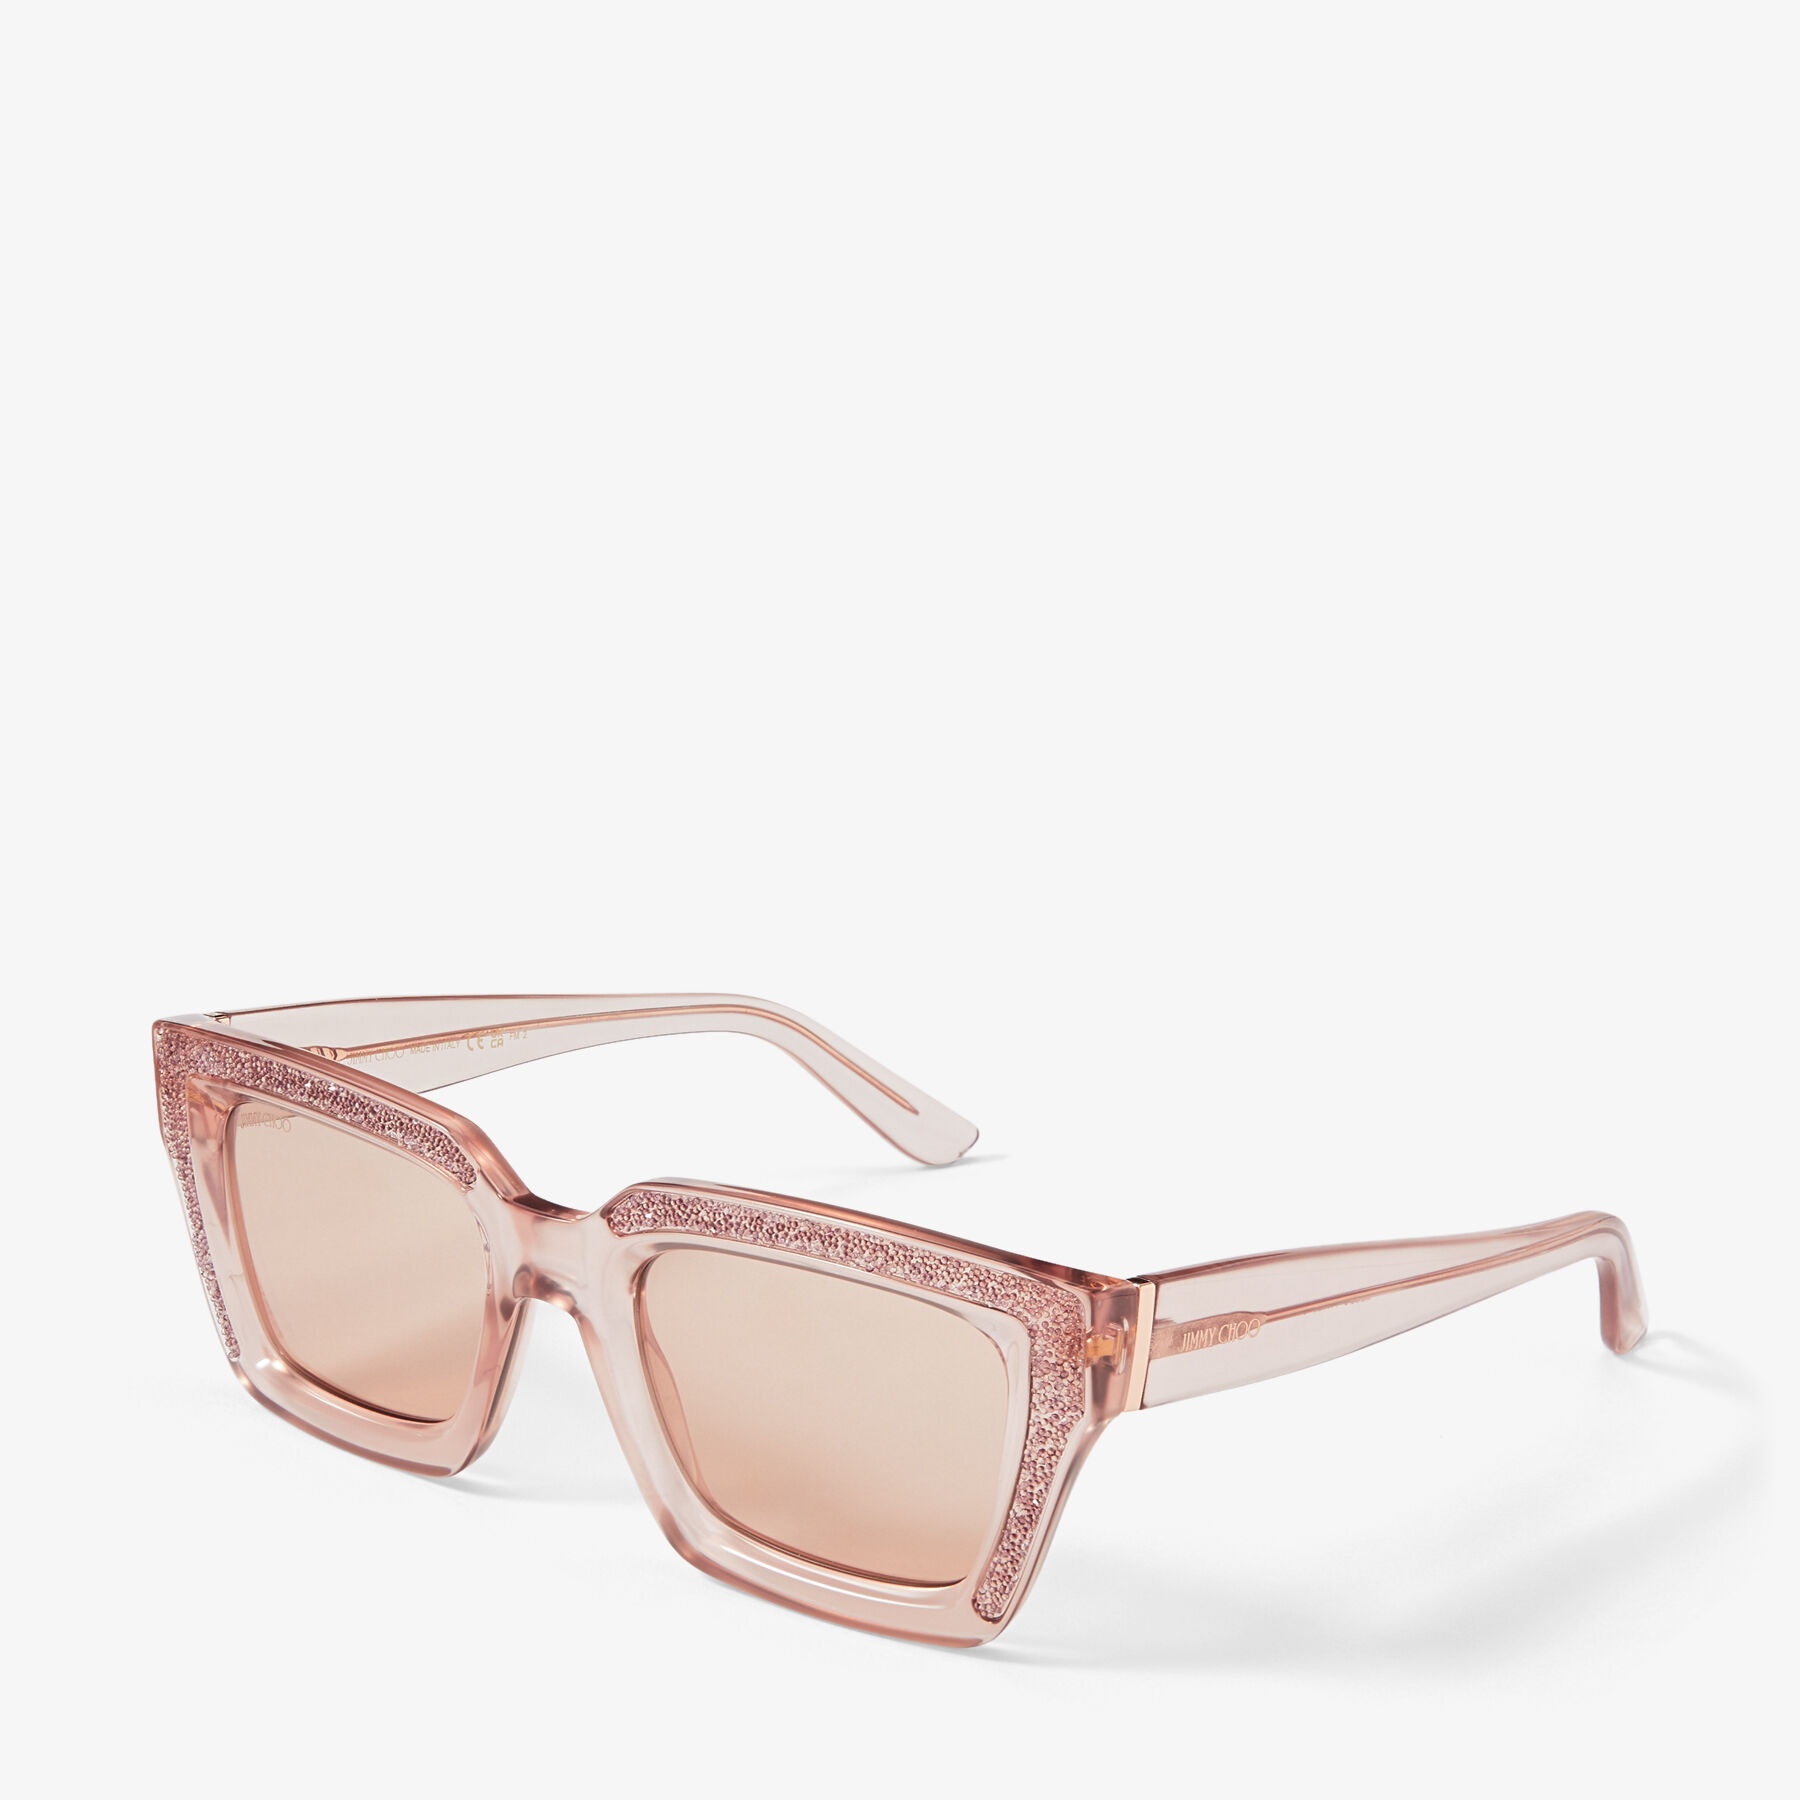 Megs
Nude Square Frame Sunglasses with Swarovski Crystals - 3